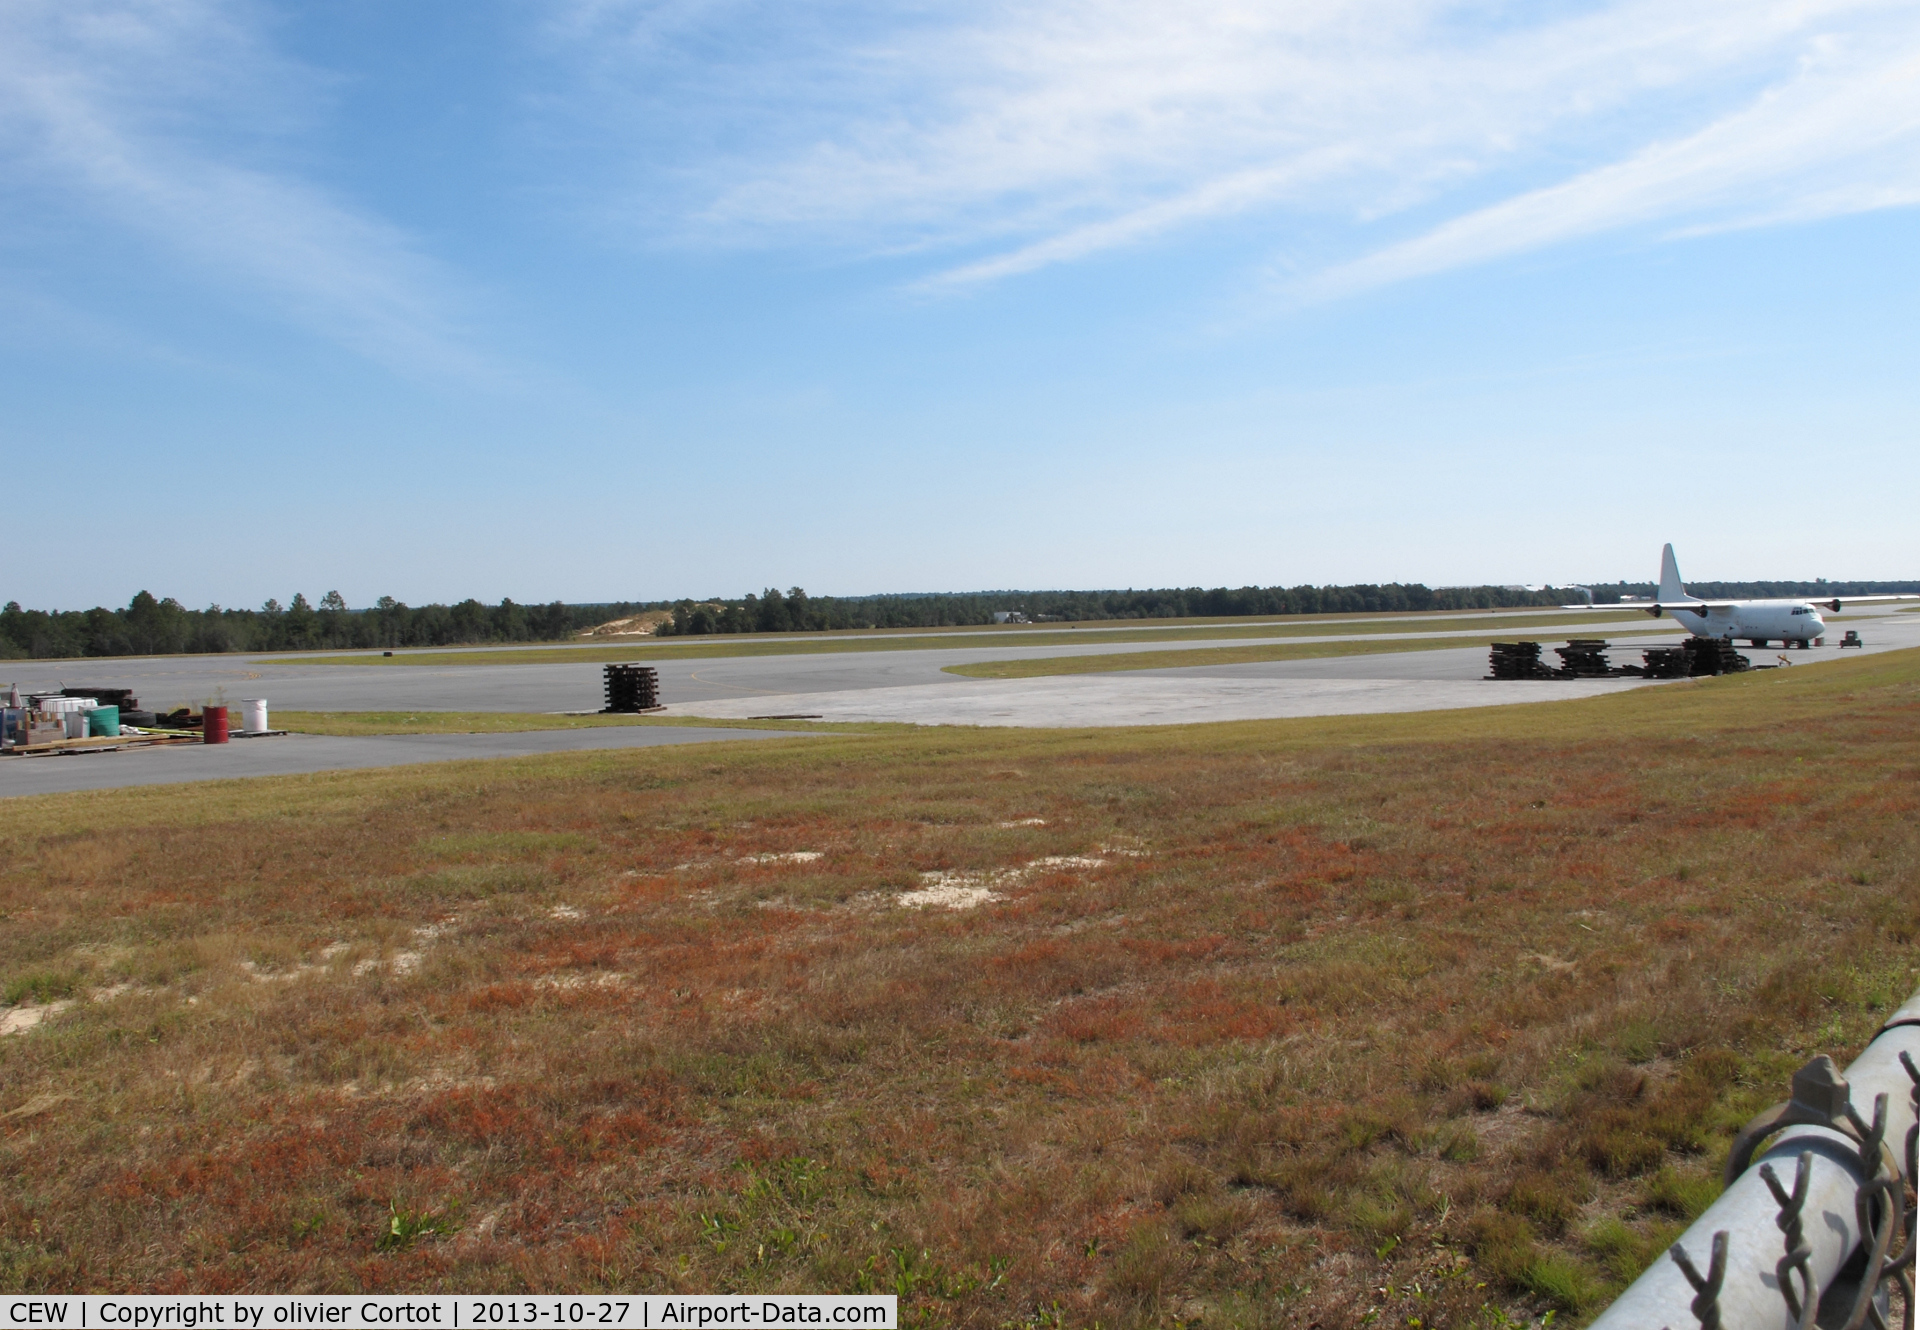 Bob Sikes Airport (CEW) - view on the runway